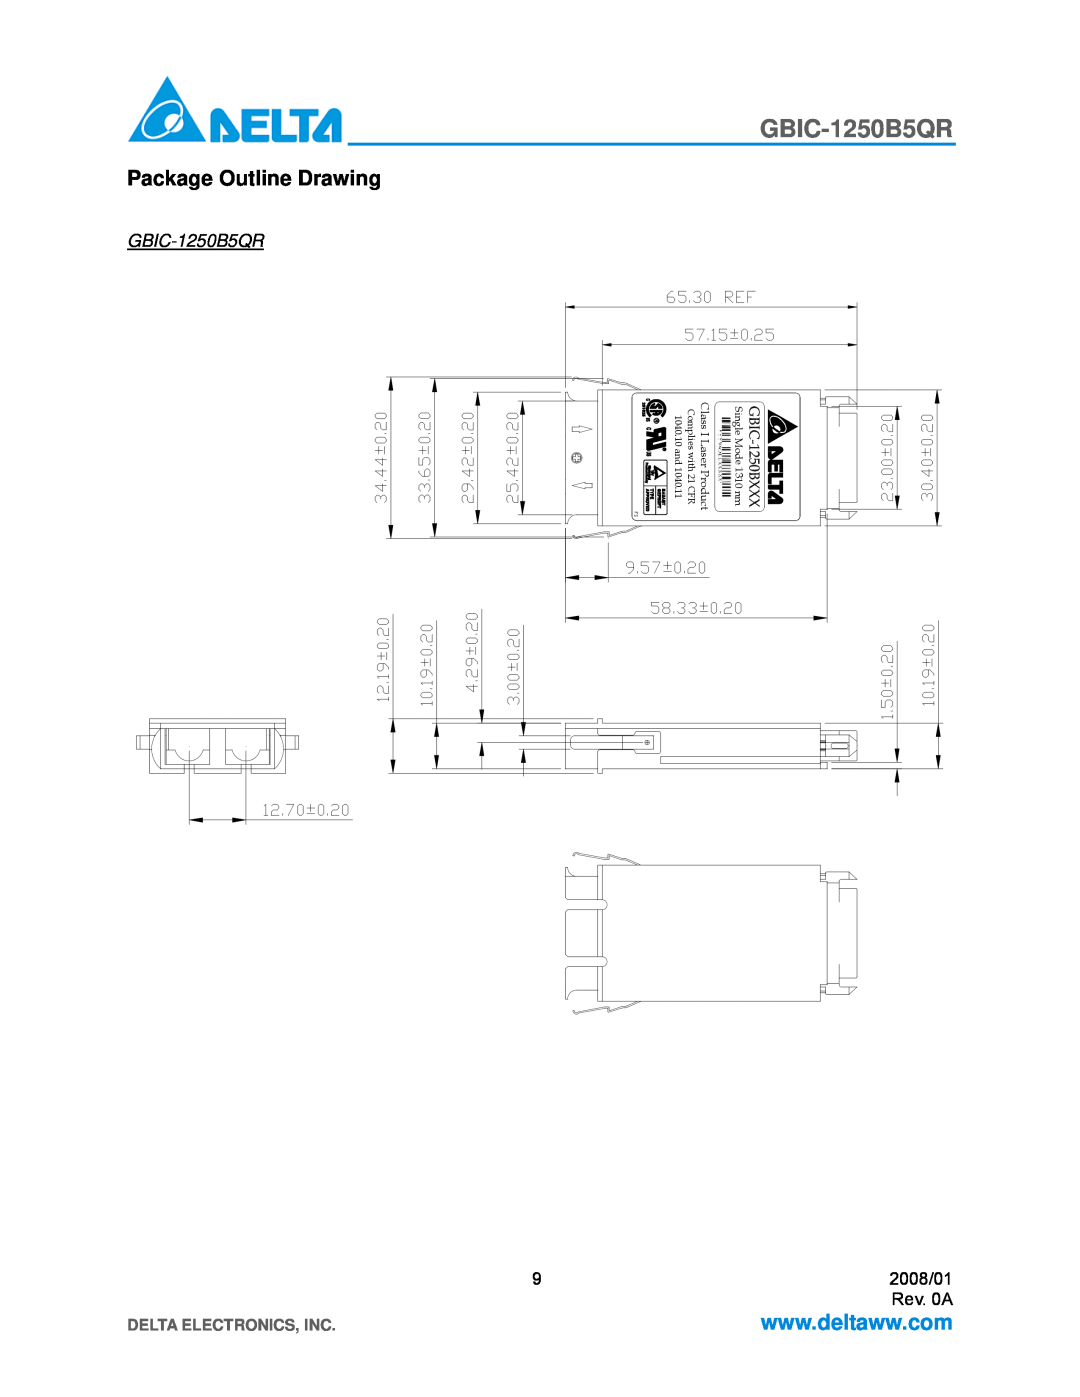 Delta Electronics GBIC-1250B5QR Package Outline Drawing, Delta Electronics, Inc, Cla ss LI ase r P ro du ct, 104 0.1, Cf R 